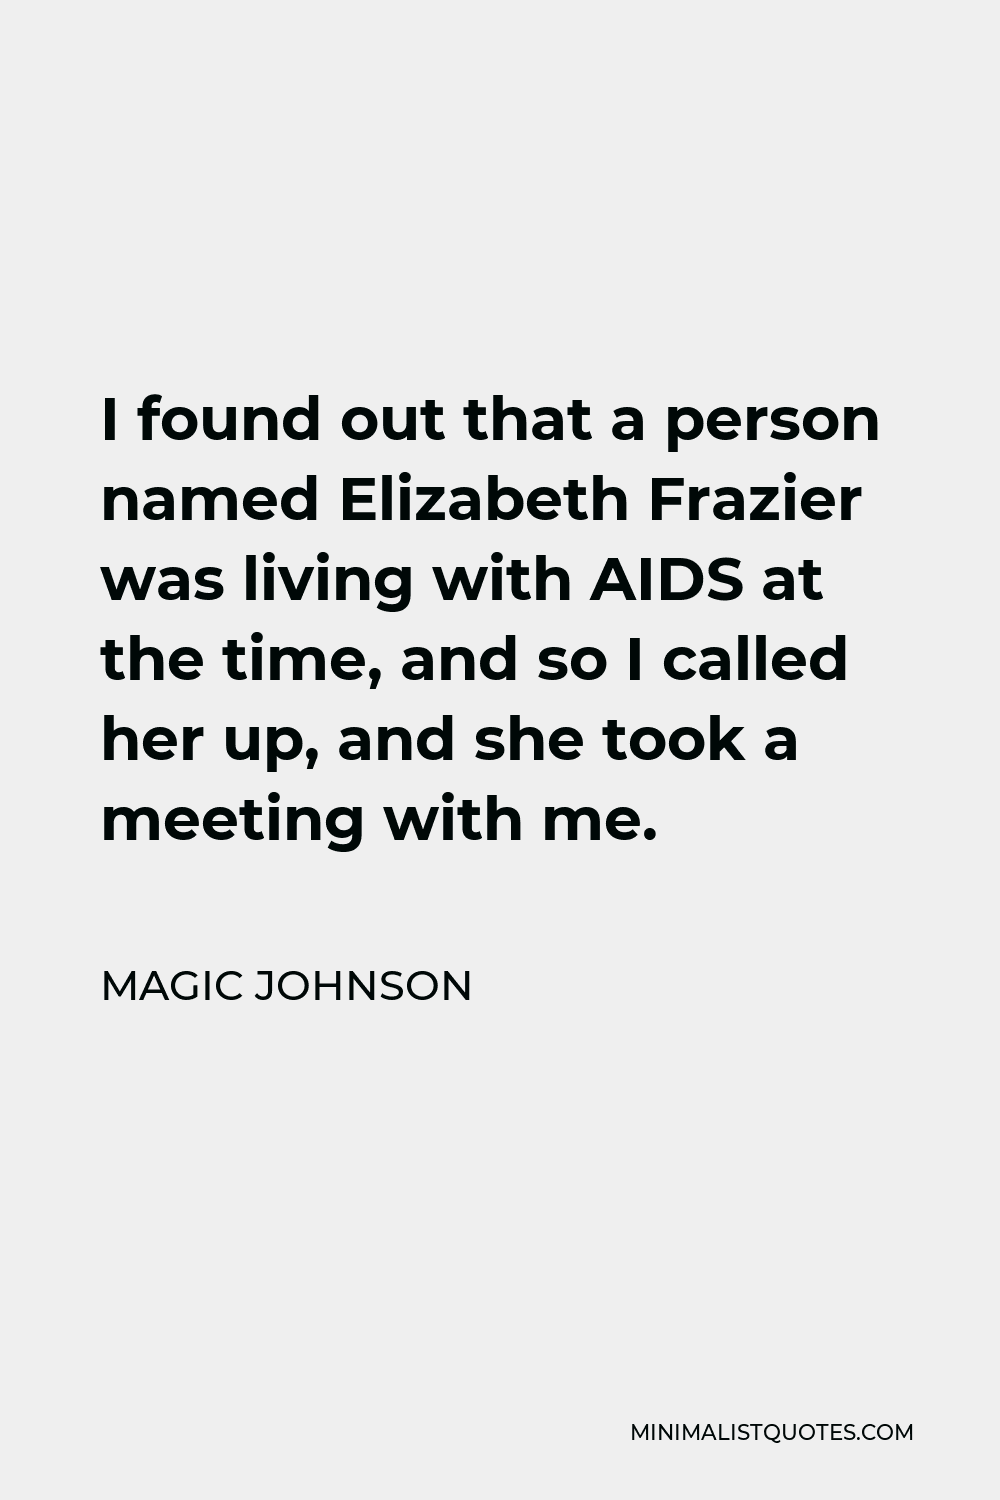 Magic Johnson Quote - I found out that a person named Elizabeth Frazier was living with AIDS at the time, and so I called her up, and she took a meeting with me.